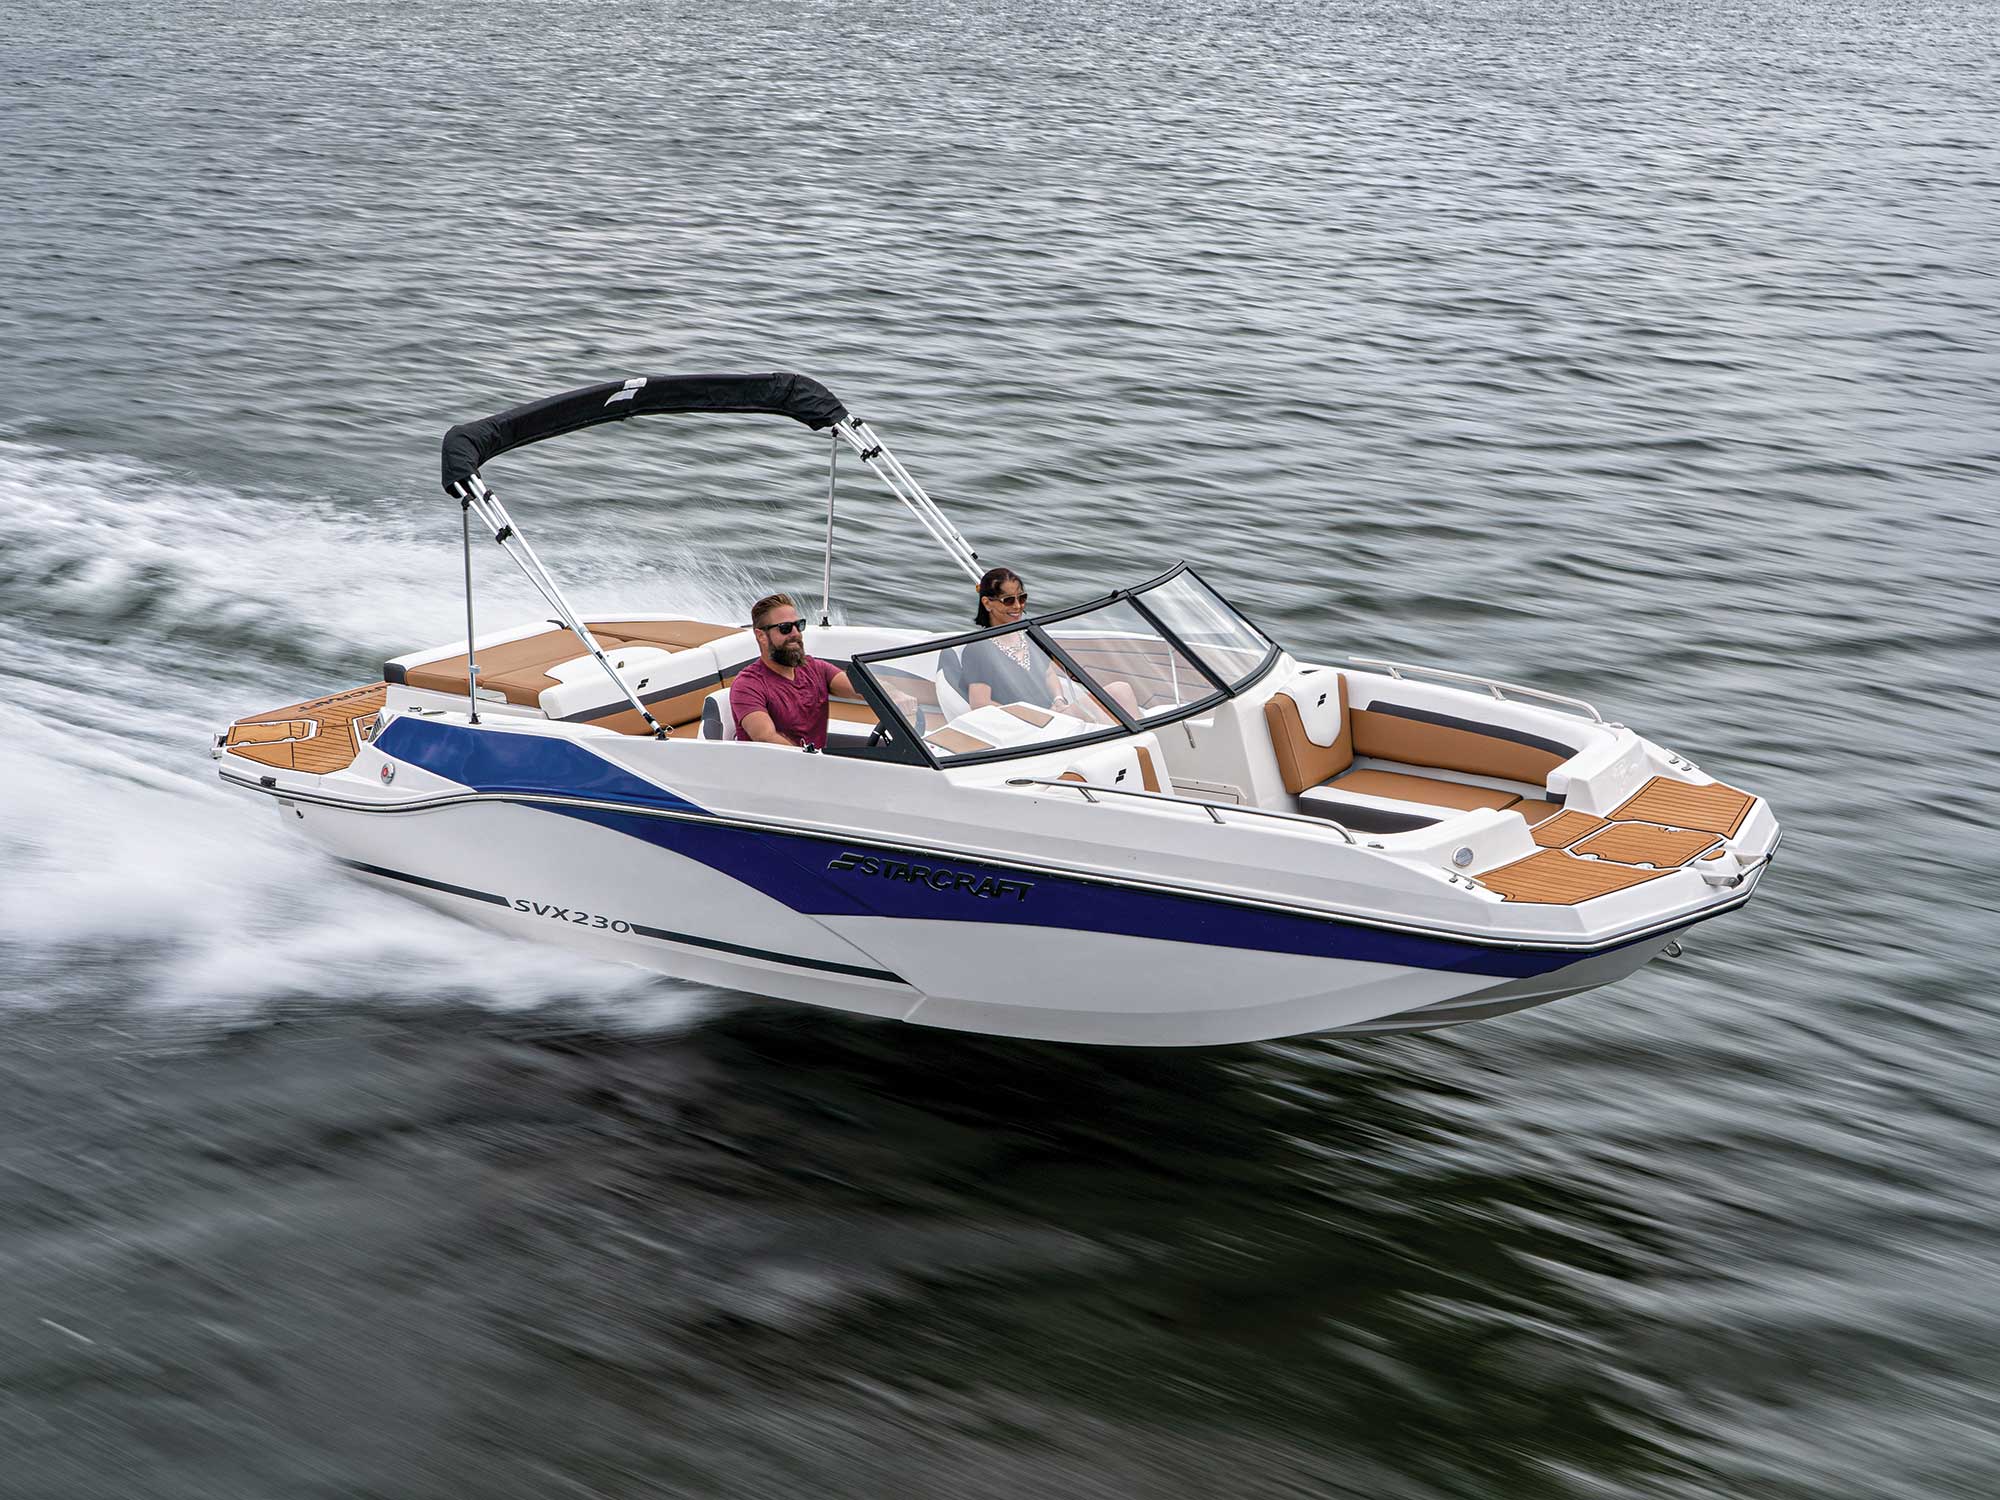 Top 15 Boating Accessories For 2021 - Lakefront Living